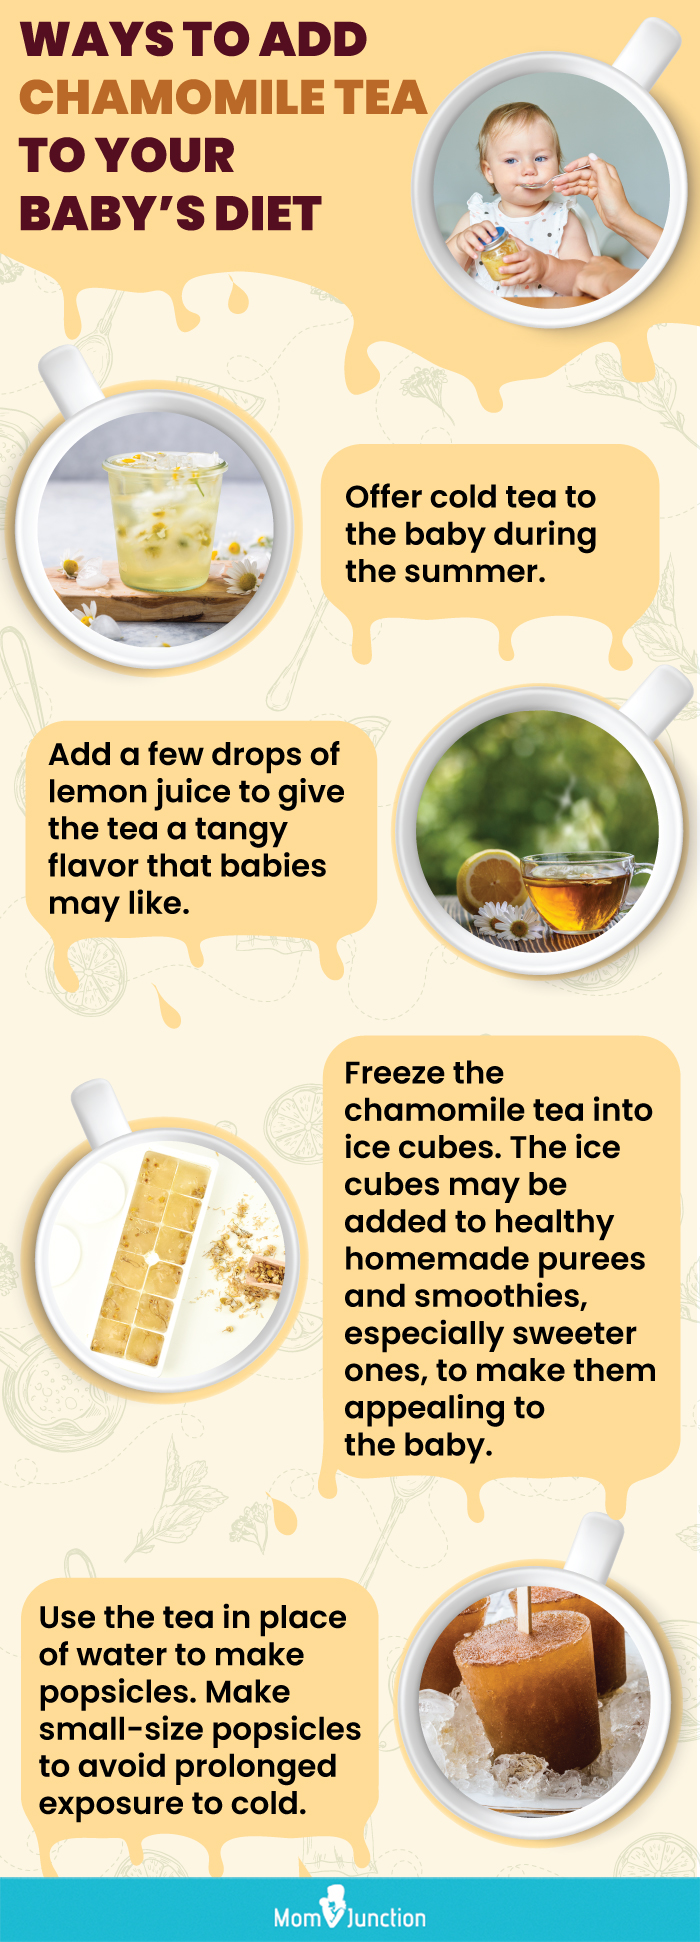 chamomile tea in your babys diet (infographic)